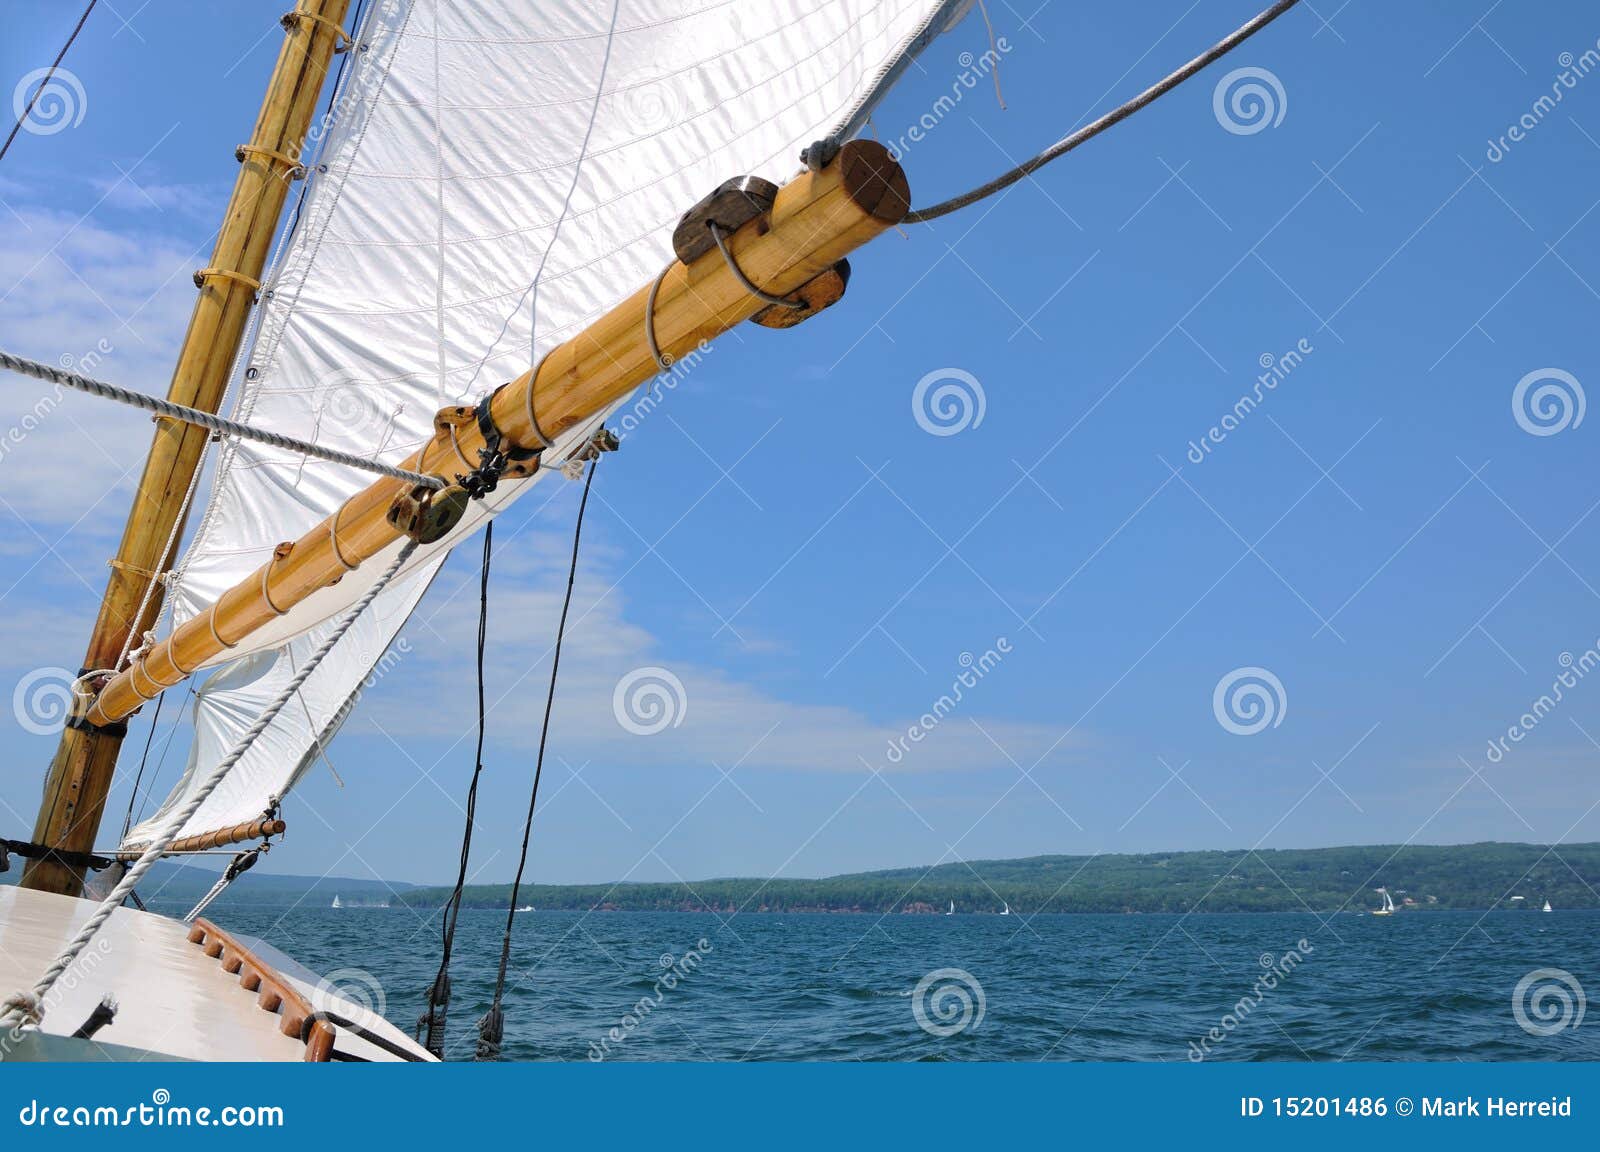 Foresail And Wooden Mast Of Schooner Sailboat Royalty Free ...